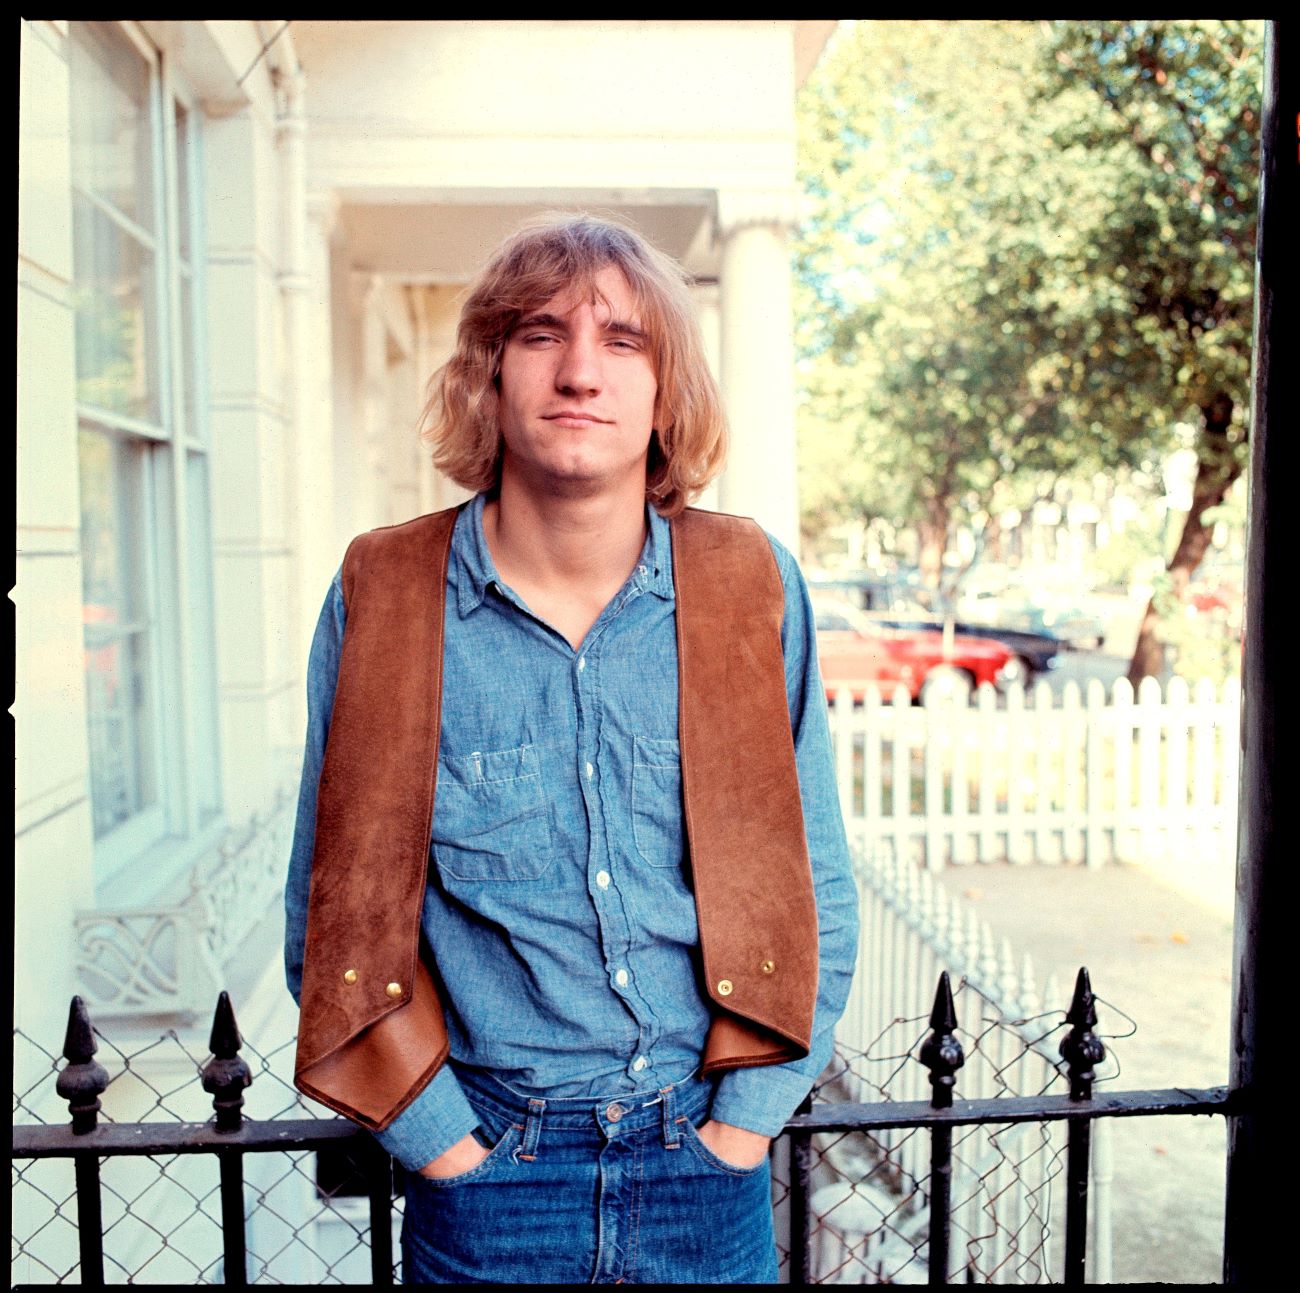 Joe Walsh of The Eagles on a porch wearing a denim shirt and brown vest.